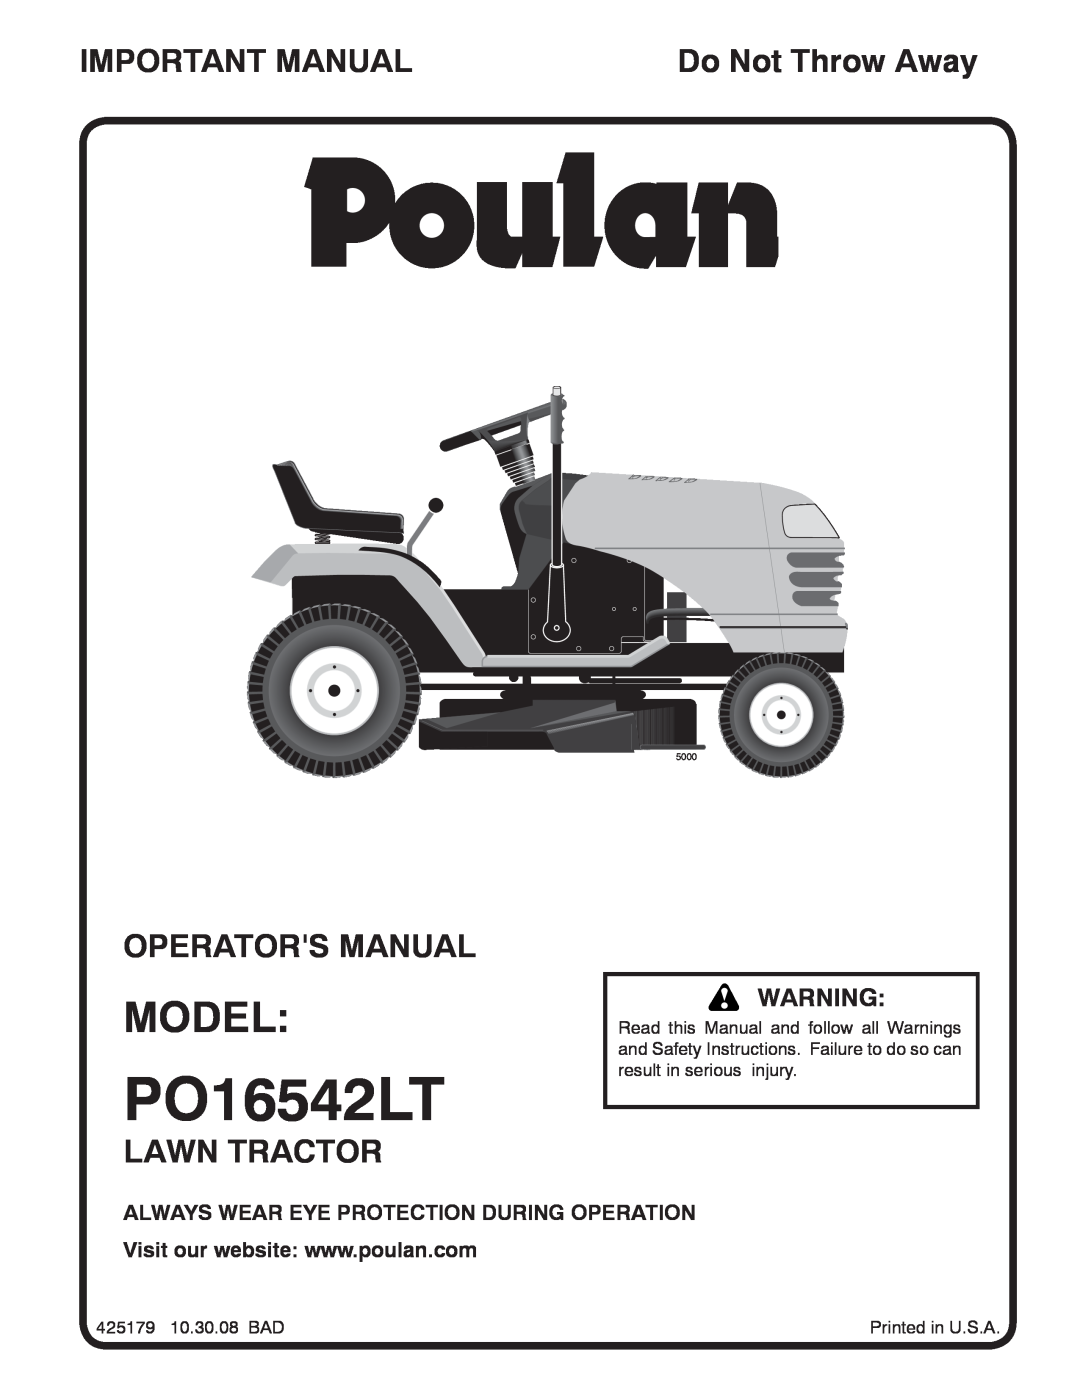 Poulan 425179 manual Model, Important Manual, Operators Manual, Lawn Tractor, Do Not Throw Away, PO16542LT, 5000 